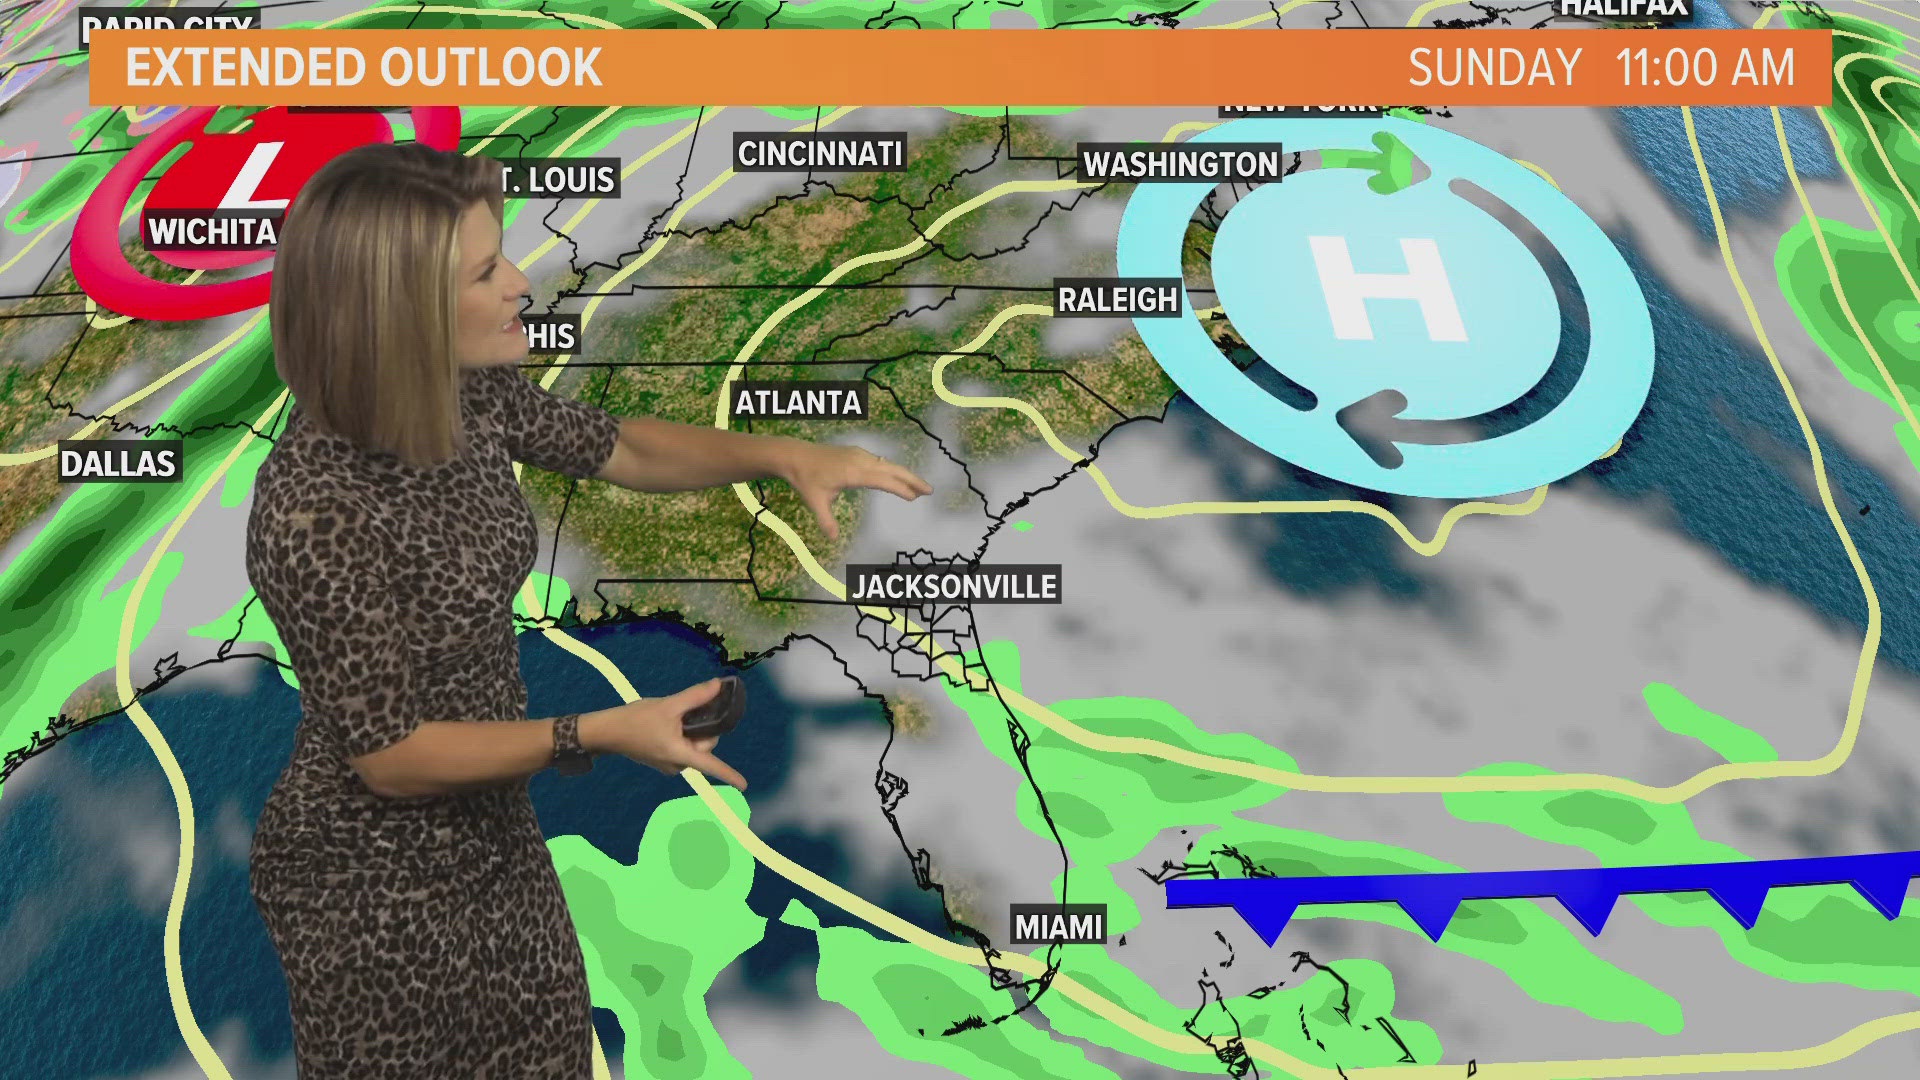 Meteorologist Lauren Rautenkranz says Jacksonville will be between high and low pressure systems this weekend keeping conditions rather breezy.